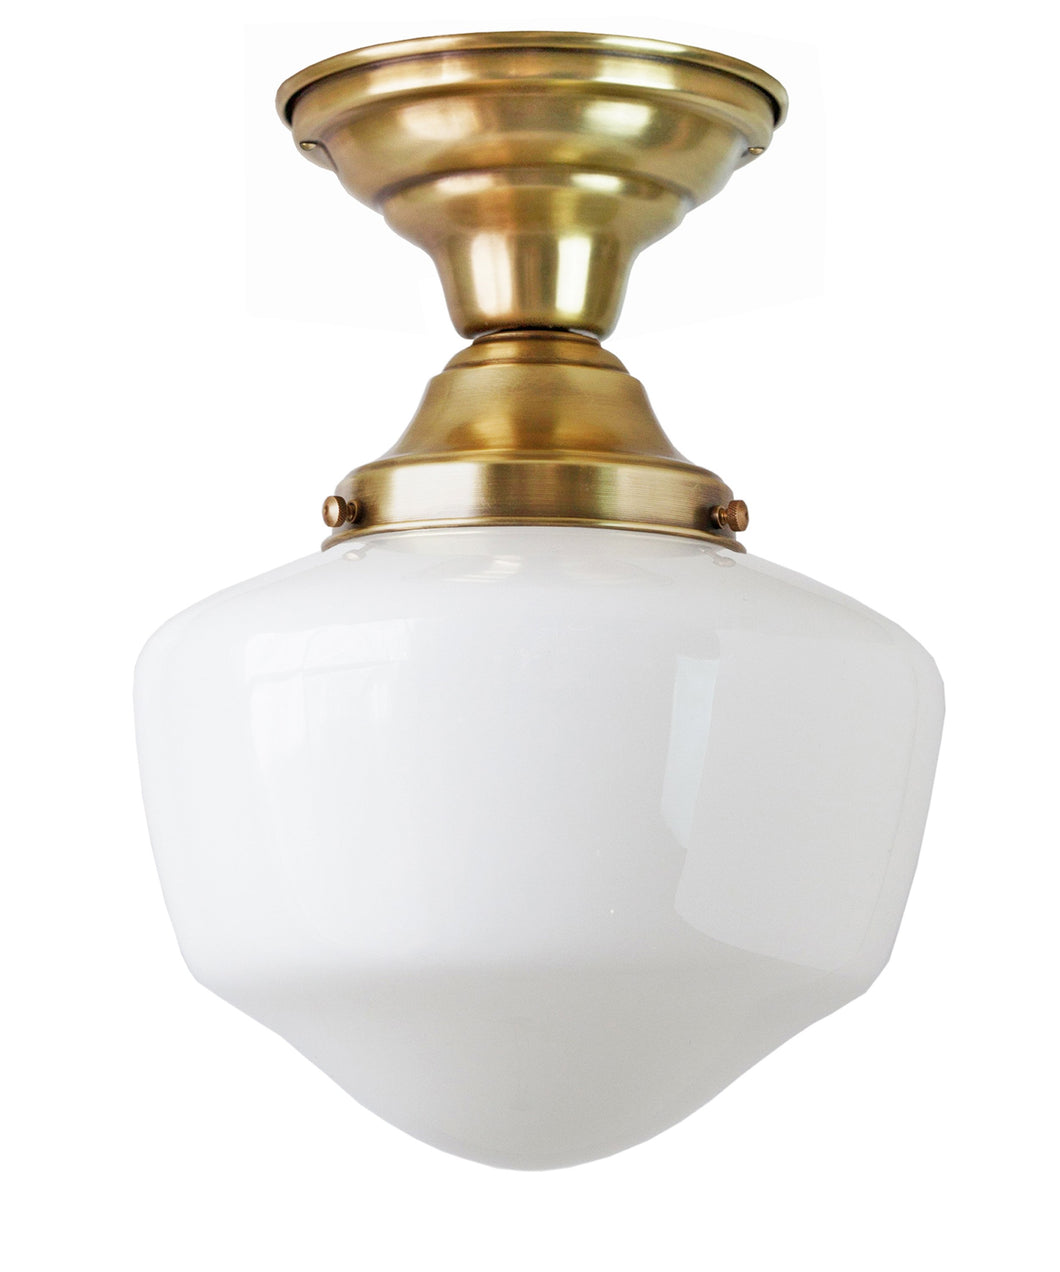 Traditional Schoolhouse Ceiling Fixture, 8